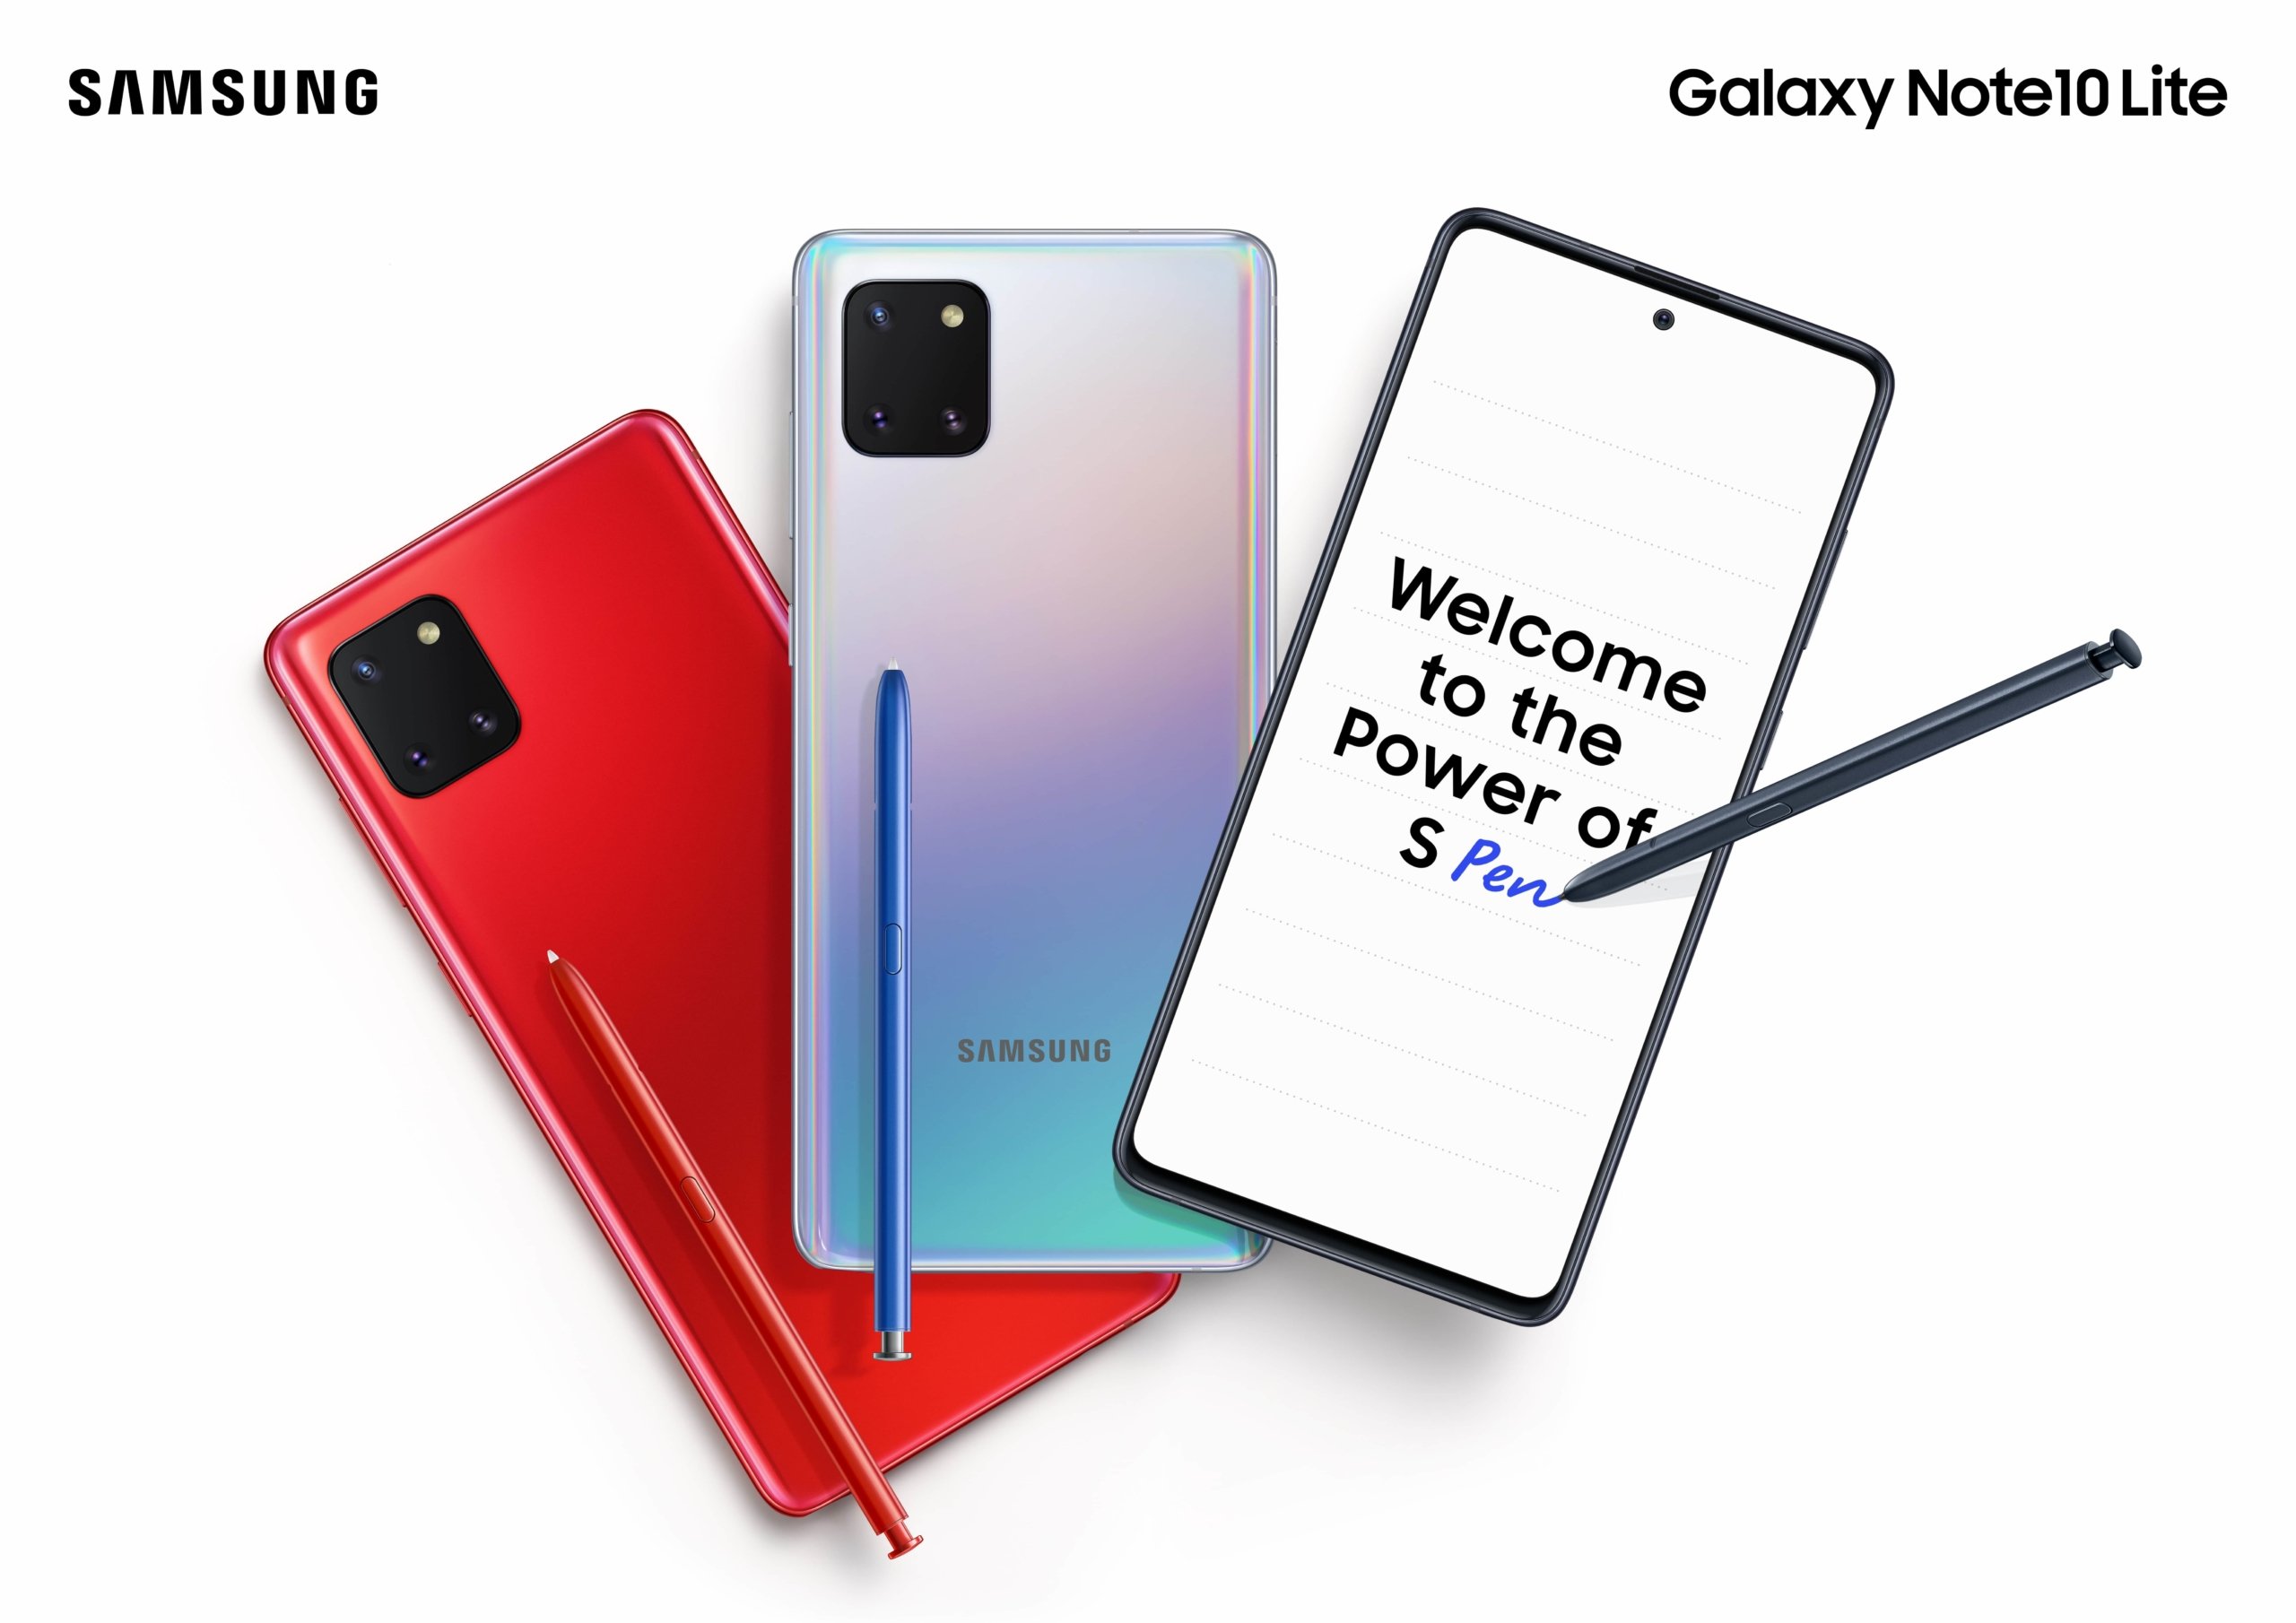 Android 11 update is now rolling out to Galaxy Note 10 Lite devices